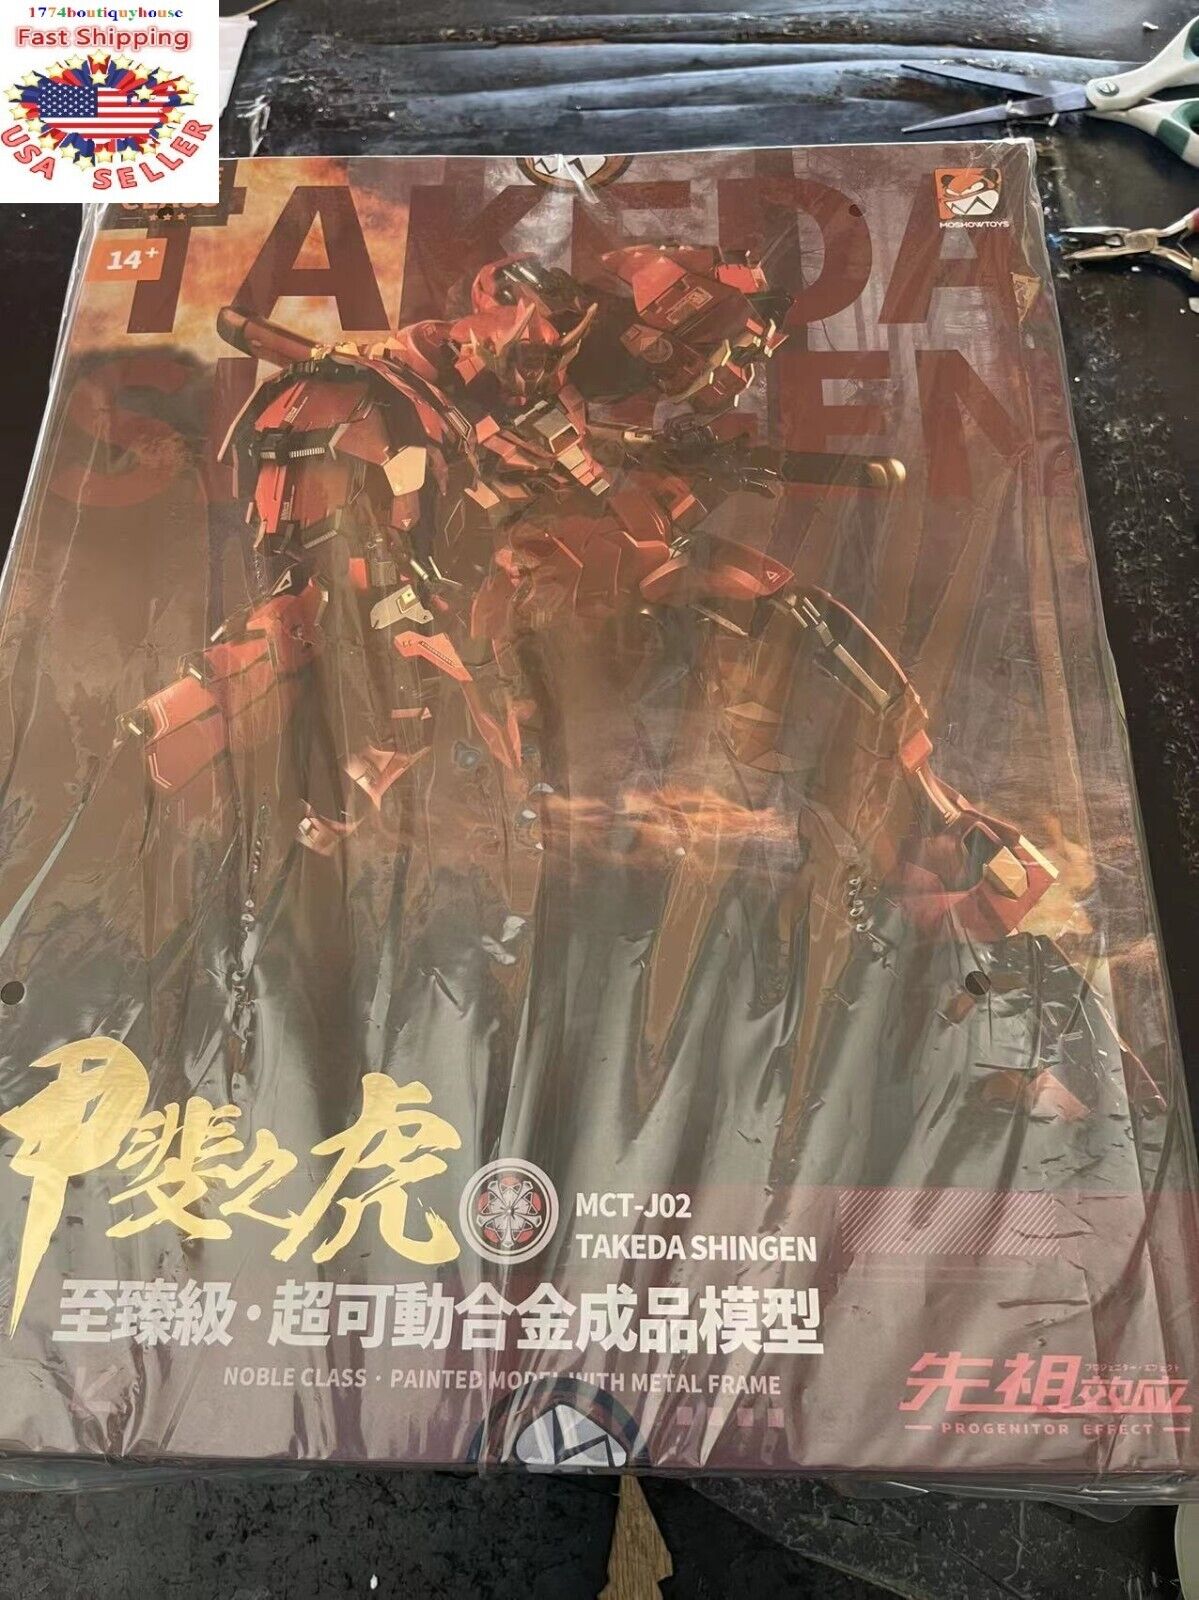 New IN BOX Moshowtoys Progenitor Effect Mct J02 Tiger Takeda Shingen 28cm  USA